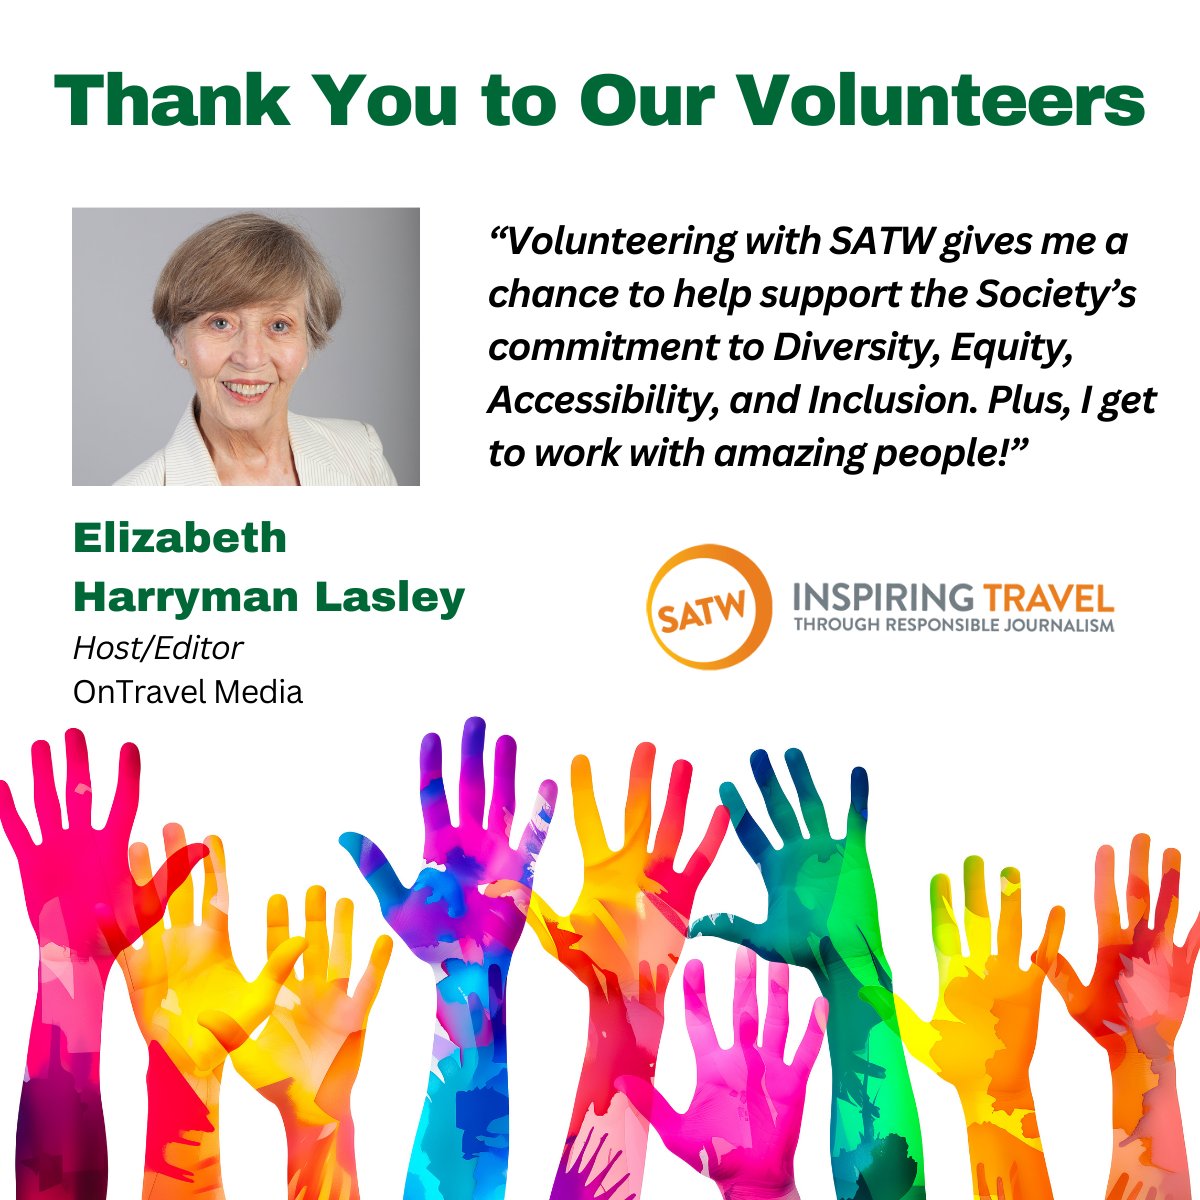 .@lizharryman, @ontravelmedia, volunteers with SATW because it gives her a chance to support our commitment to DEAI & to connect more deeply with our incredible members. Thank you, Elizabeth, for all you do!

#NationalVolunteerWeek #TravelWriting #TravelBlogging #Travel